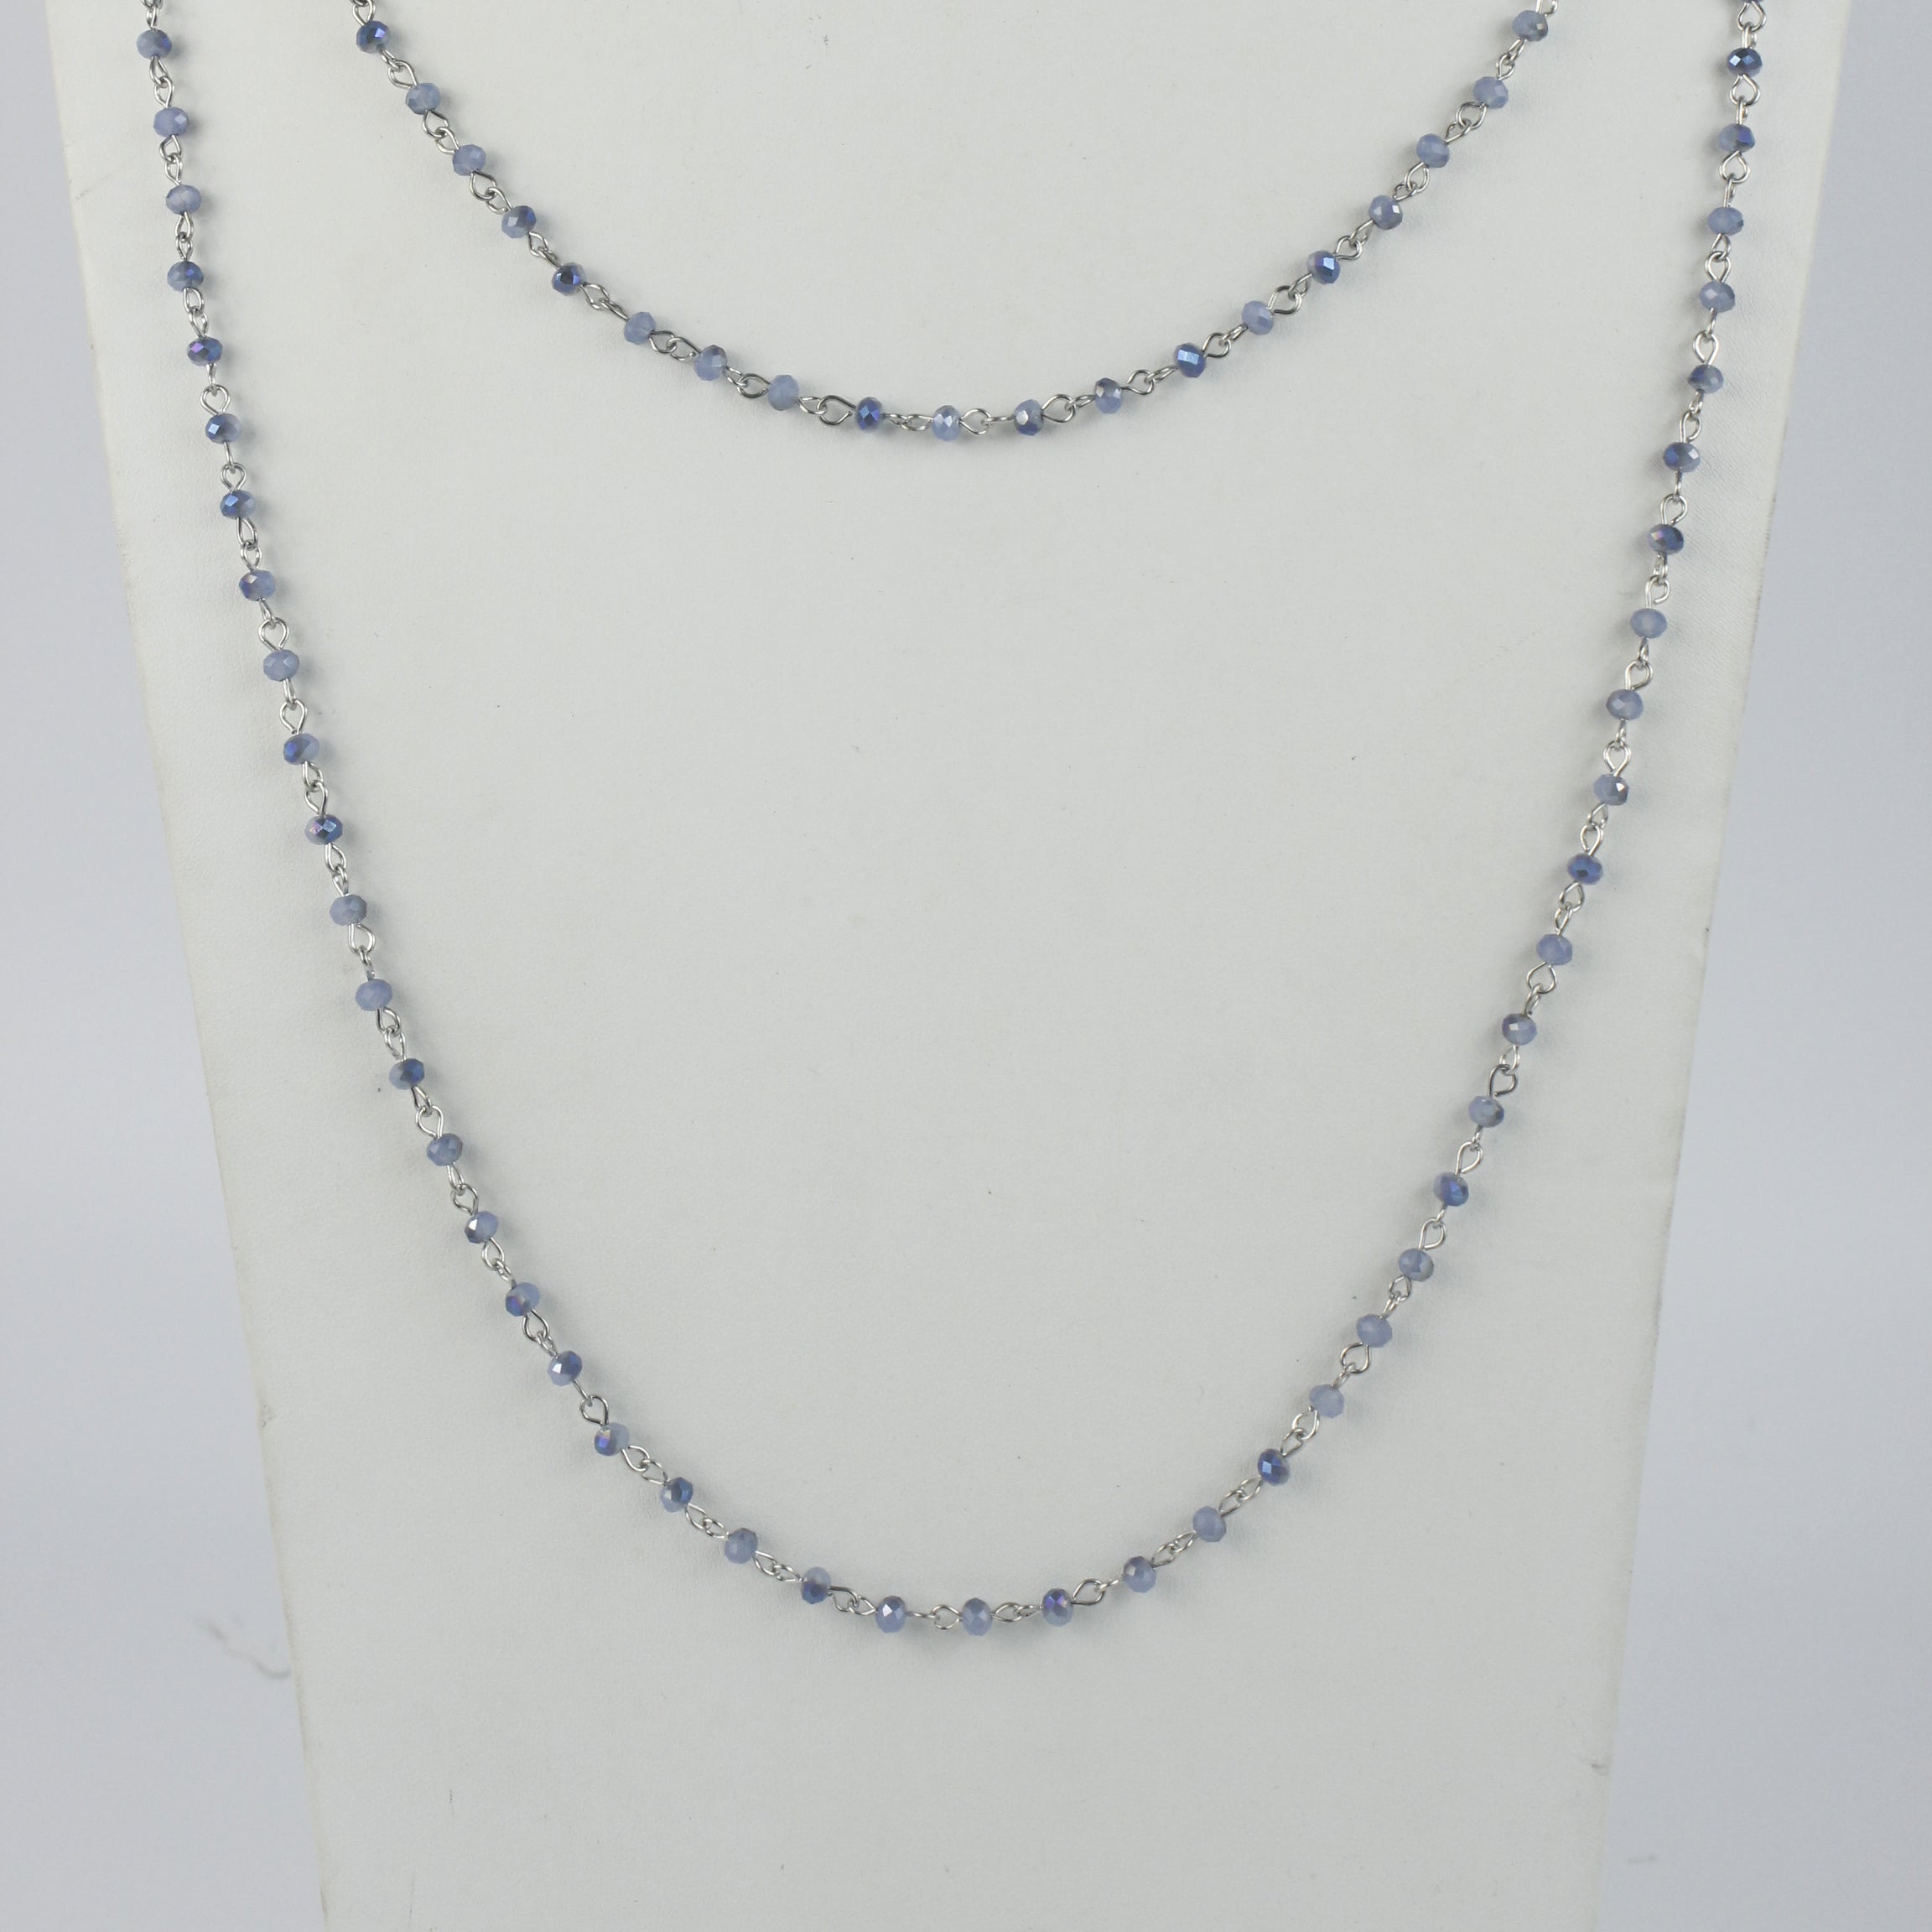 Crystal Beads Chain Necklace N1163-39